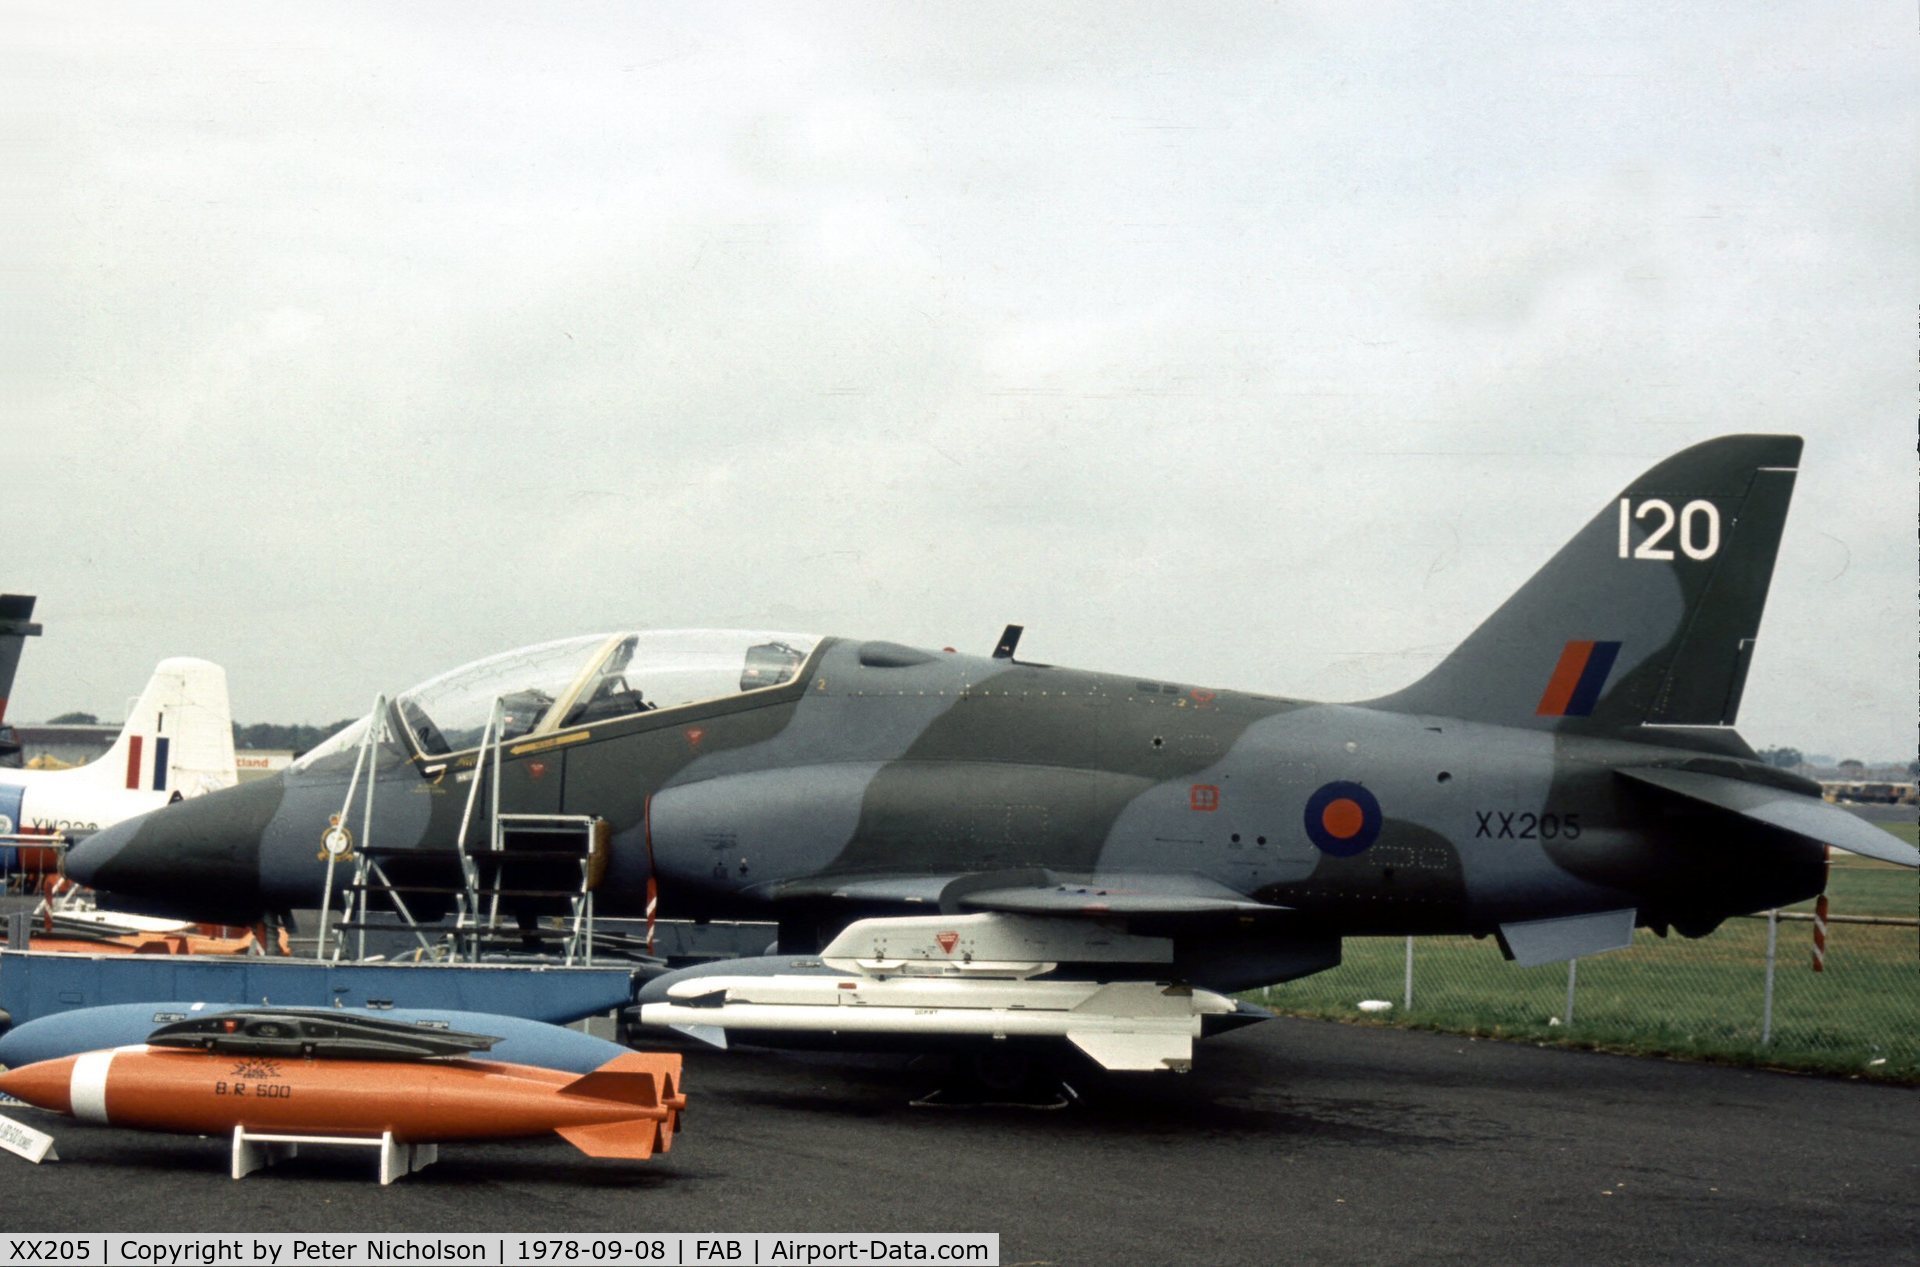 XX205, 1978 Hawker Siddeley Hawk T.1 C/N 052/312052, Before conversion to the T.1A model, this Hawk T.1 was serving with the Tactical Weapons Unit and coded 120 when displayed at the 1978 Farnborough Air Show.